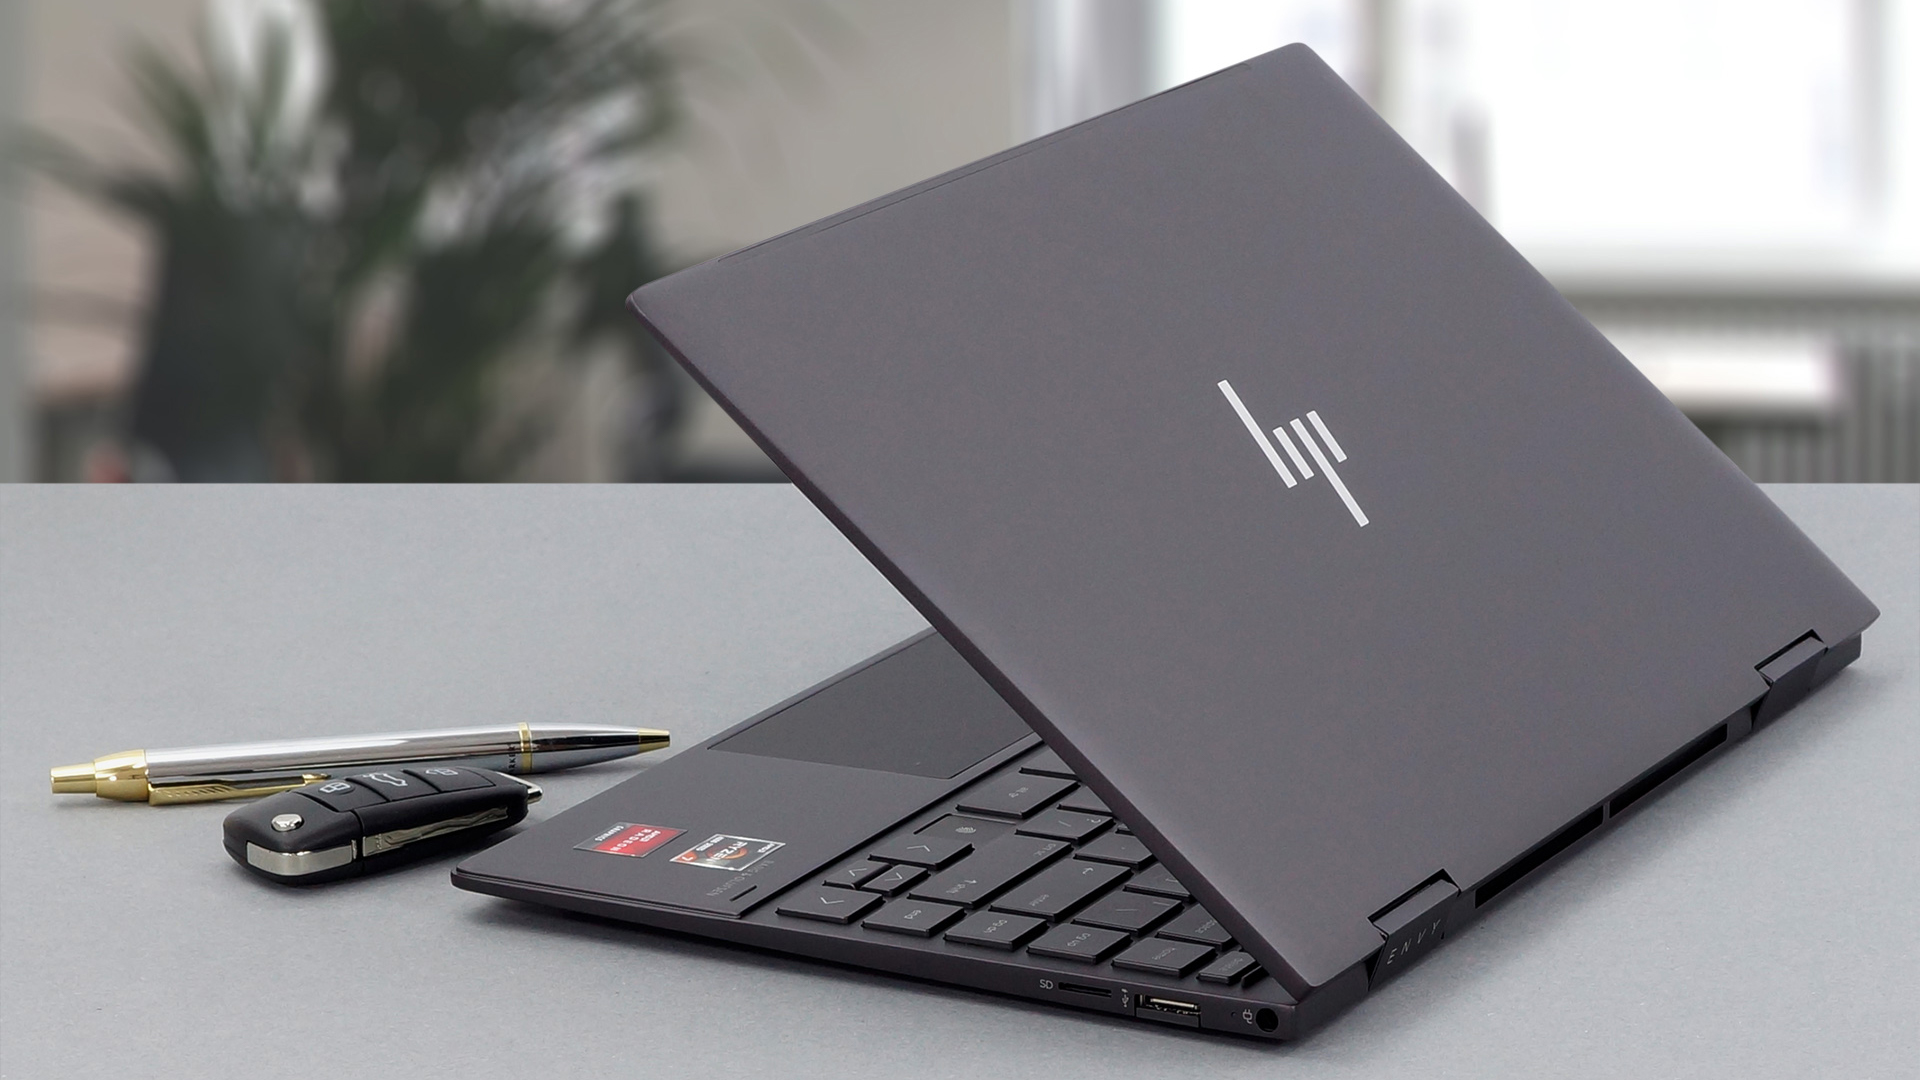 HP Envy x360 13 (13-ay0000) review - a great little machine for